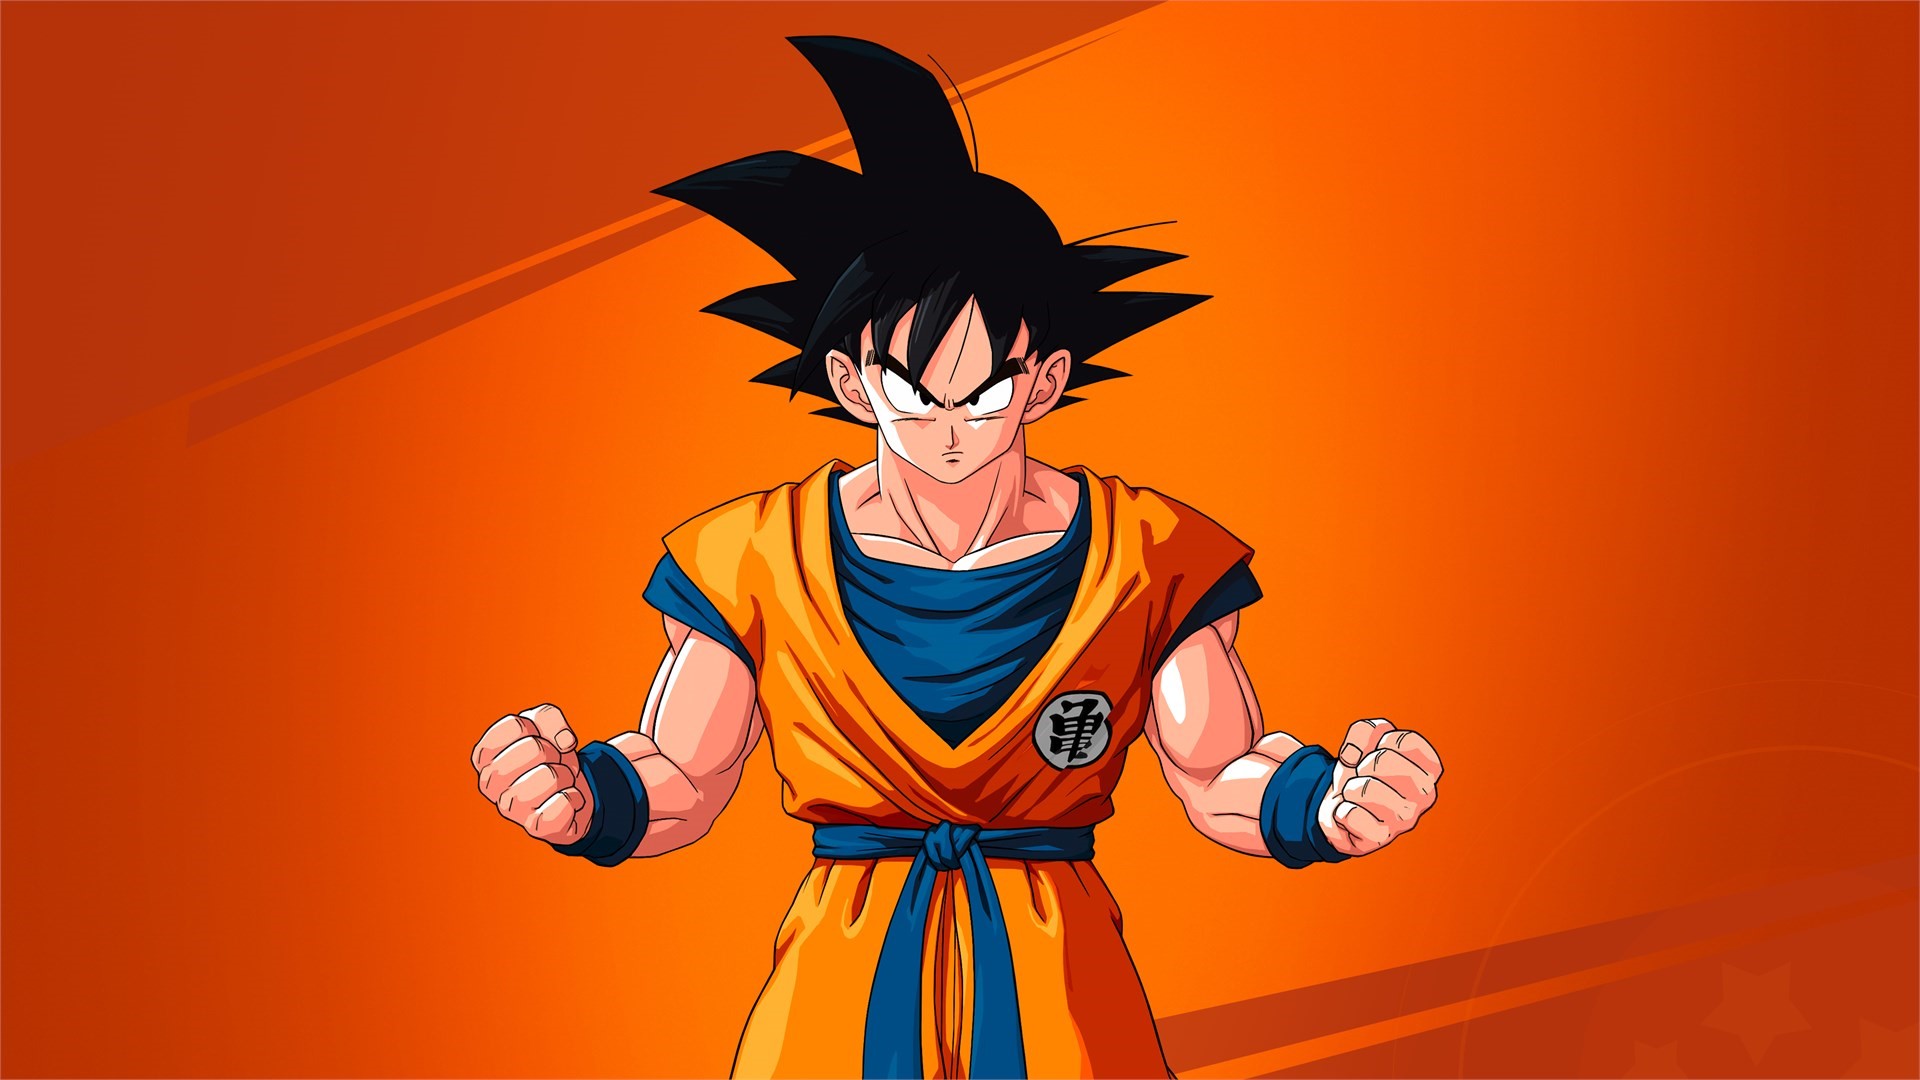 Not sure if anyone would want this, here's a huge collection of Dragon Ball  Z Budokai Tenkaichi 3 wallpapers (in game model screenshots of different  characters) If you want a specific character